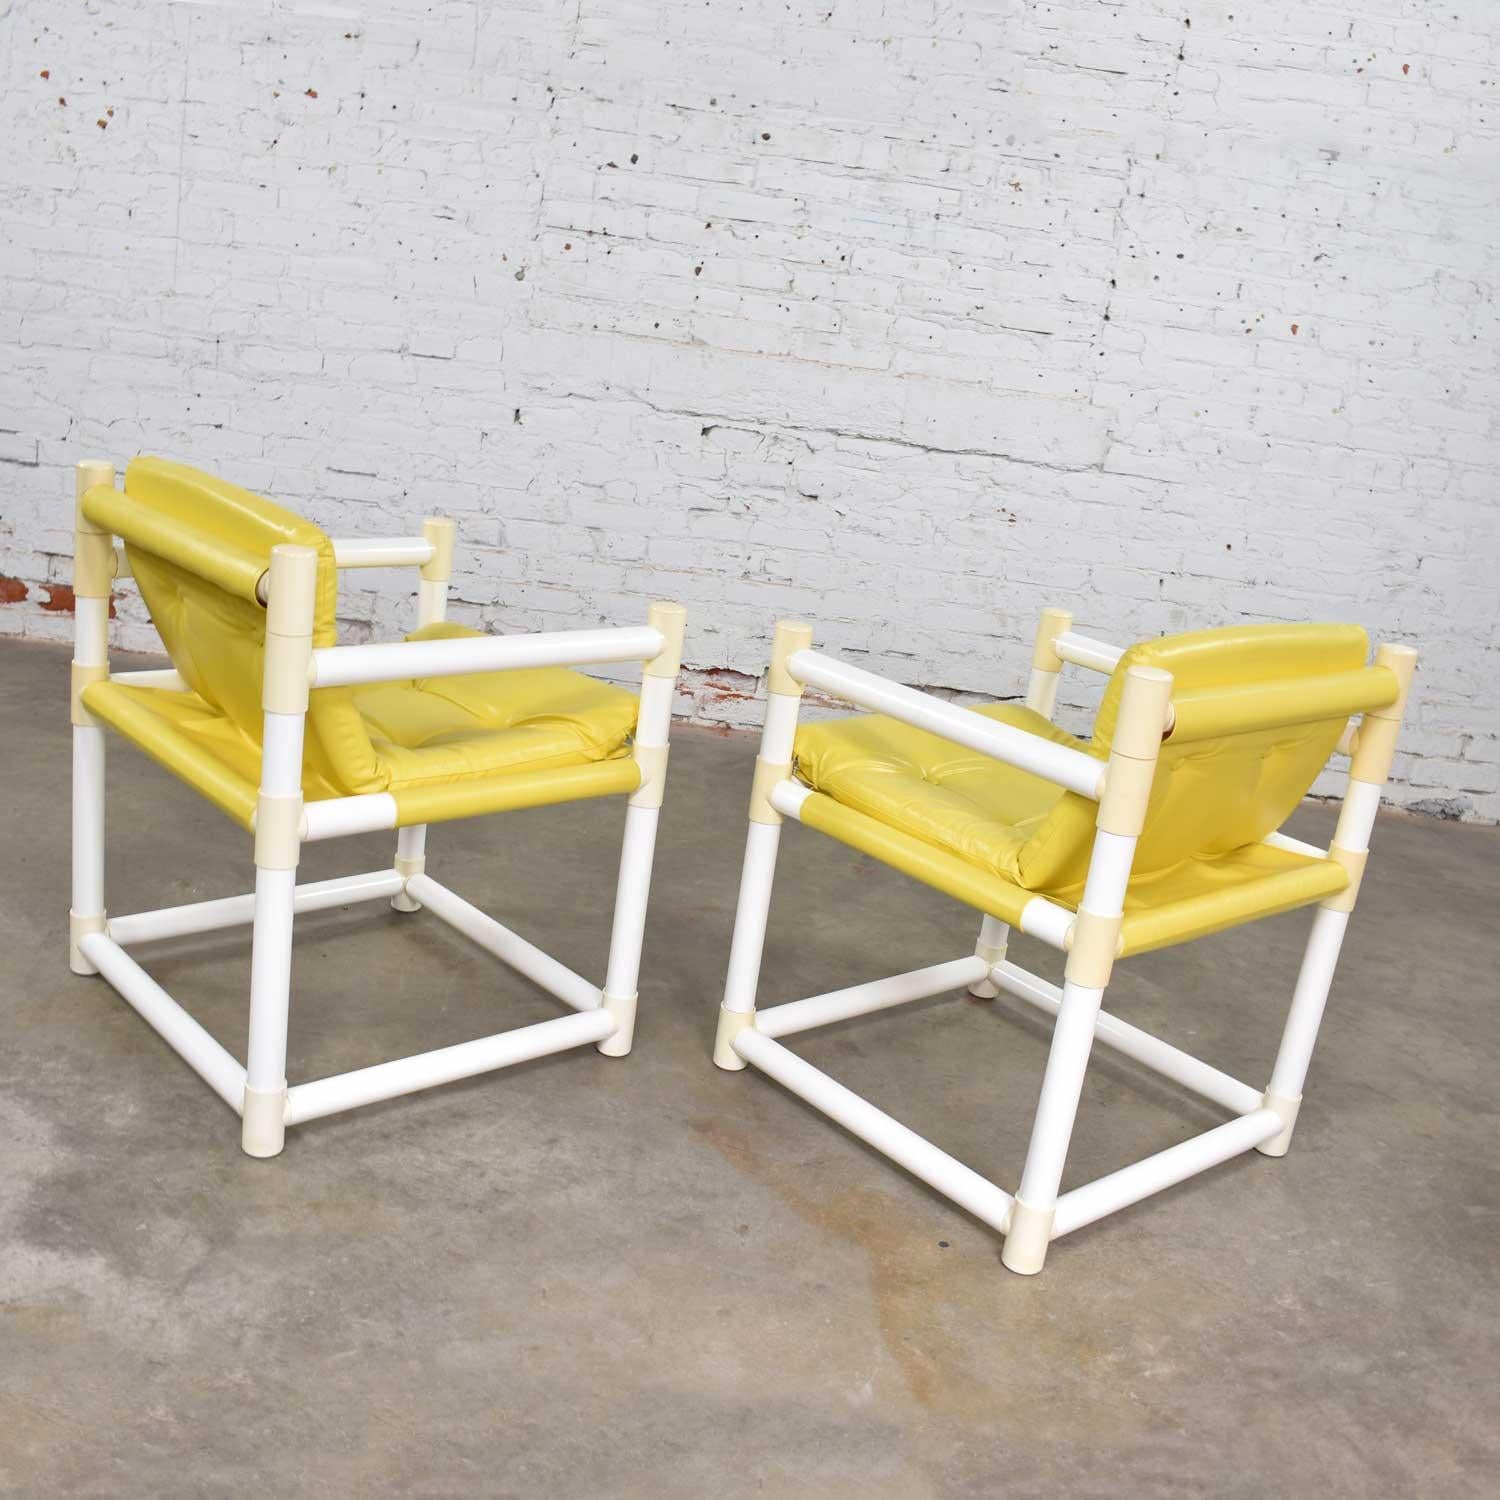 pvc pipe chairs